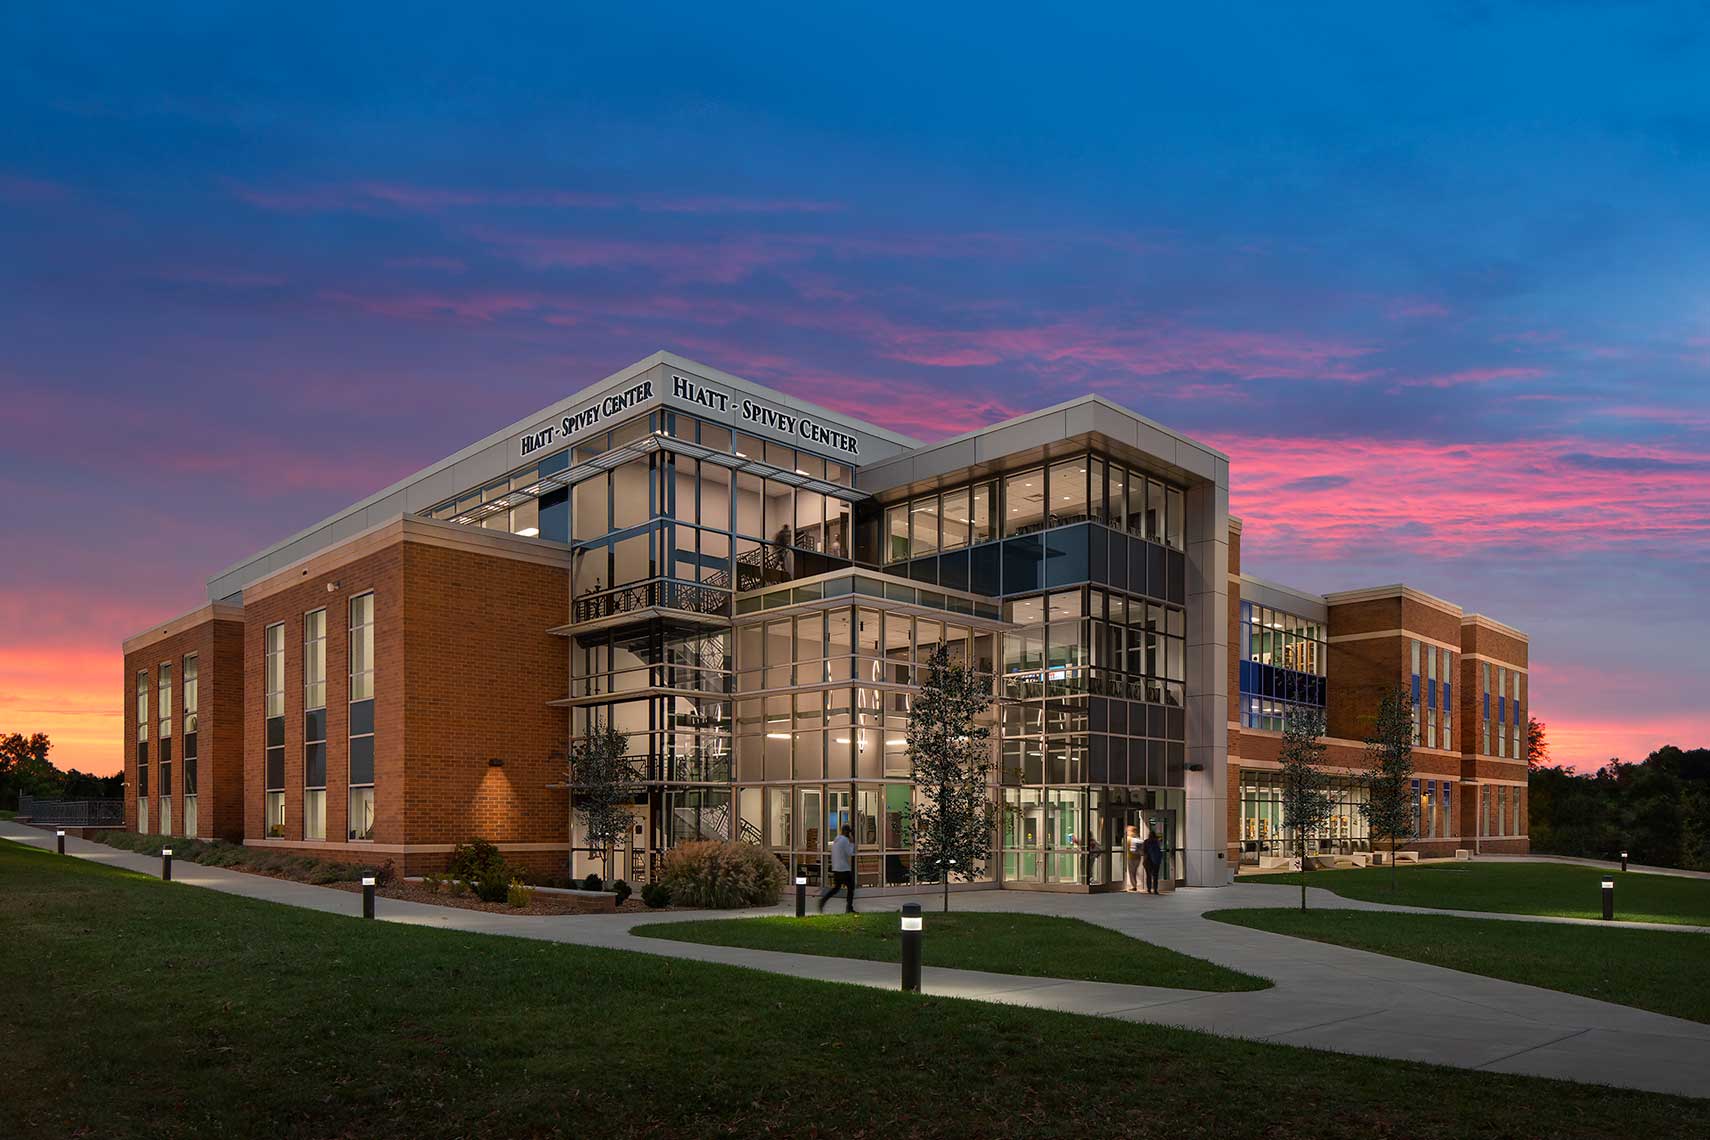 A striking exterior twilight view of Motlow State Community College in Smyrna, Tennessee